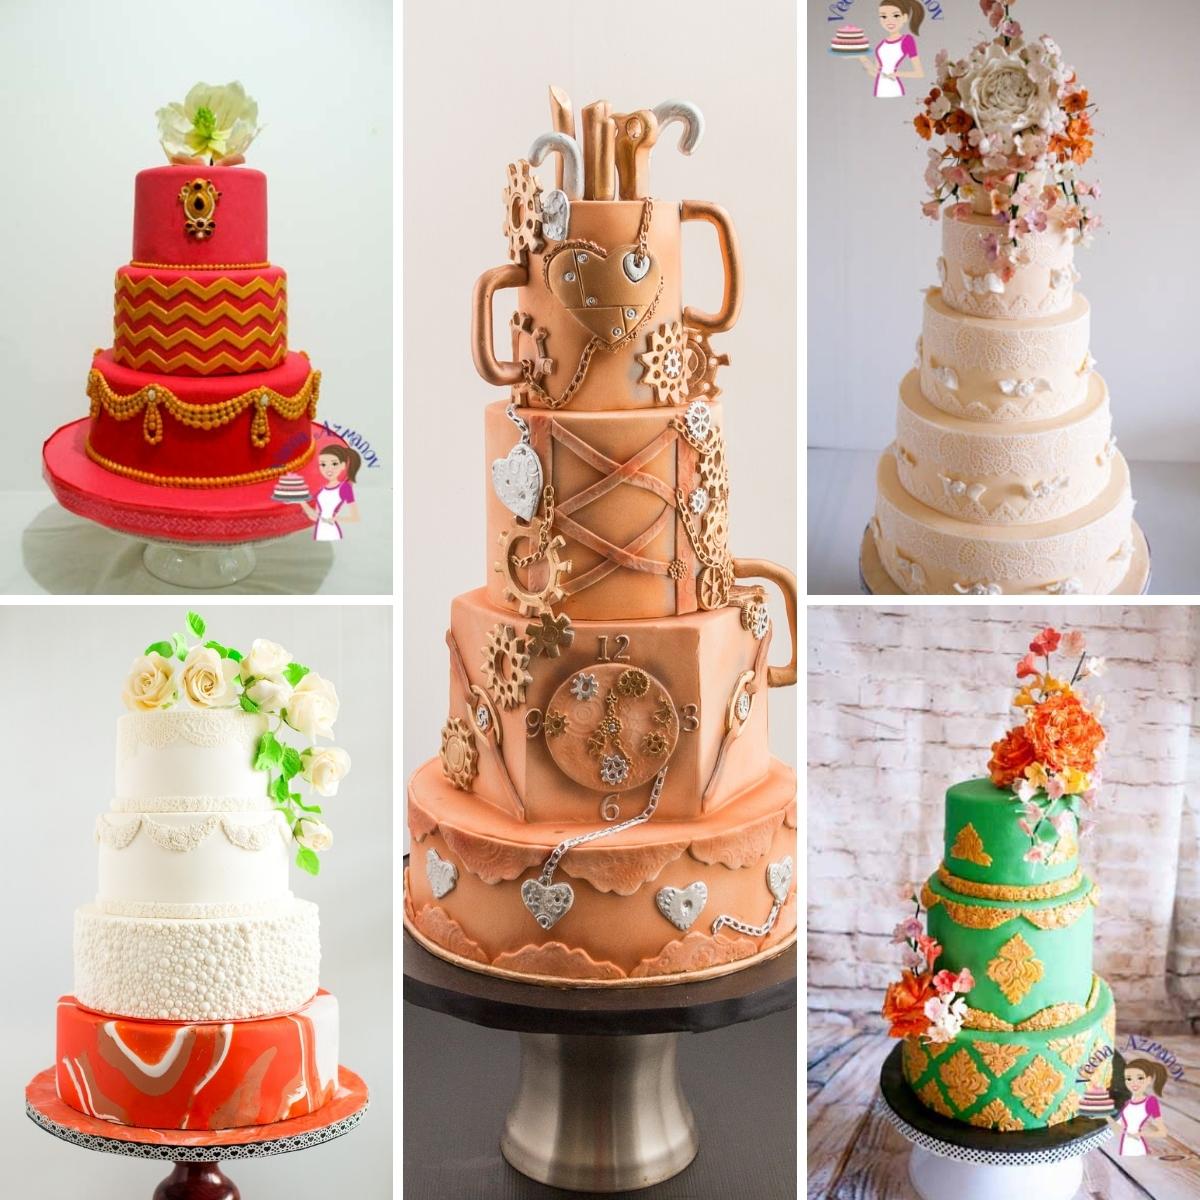 Where to Find Inspiration for Cakes